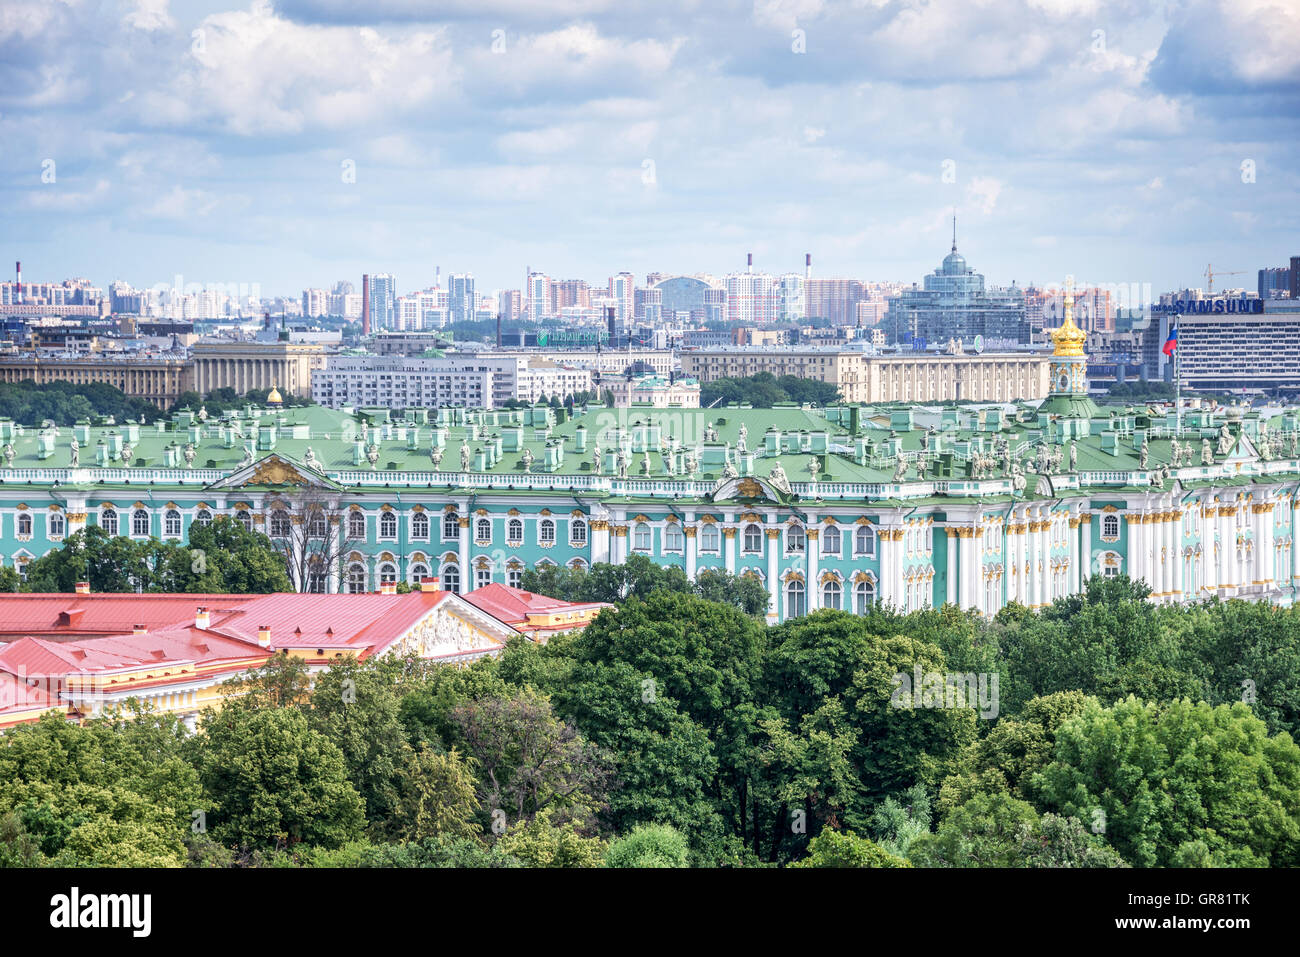 Aerial view of the Hermitage, St Petersburg, Russia Stock Photo